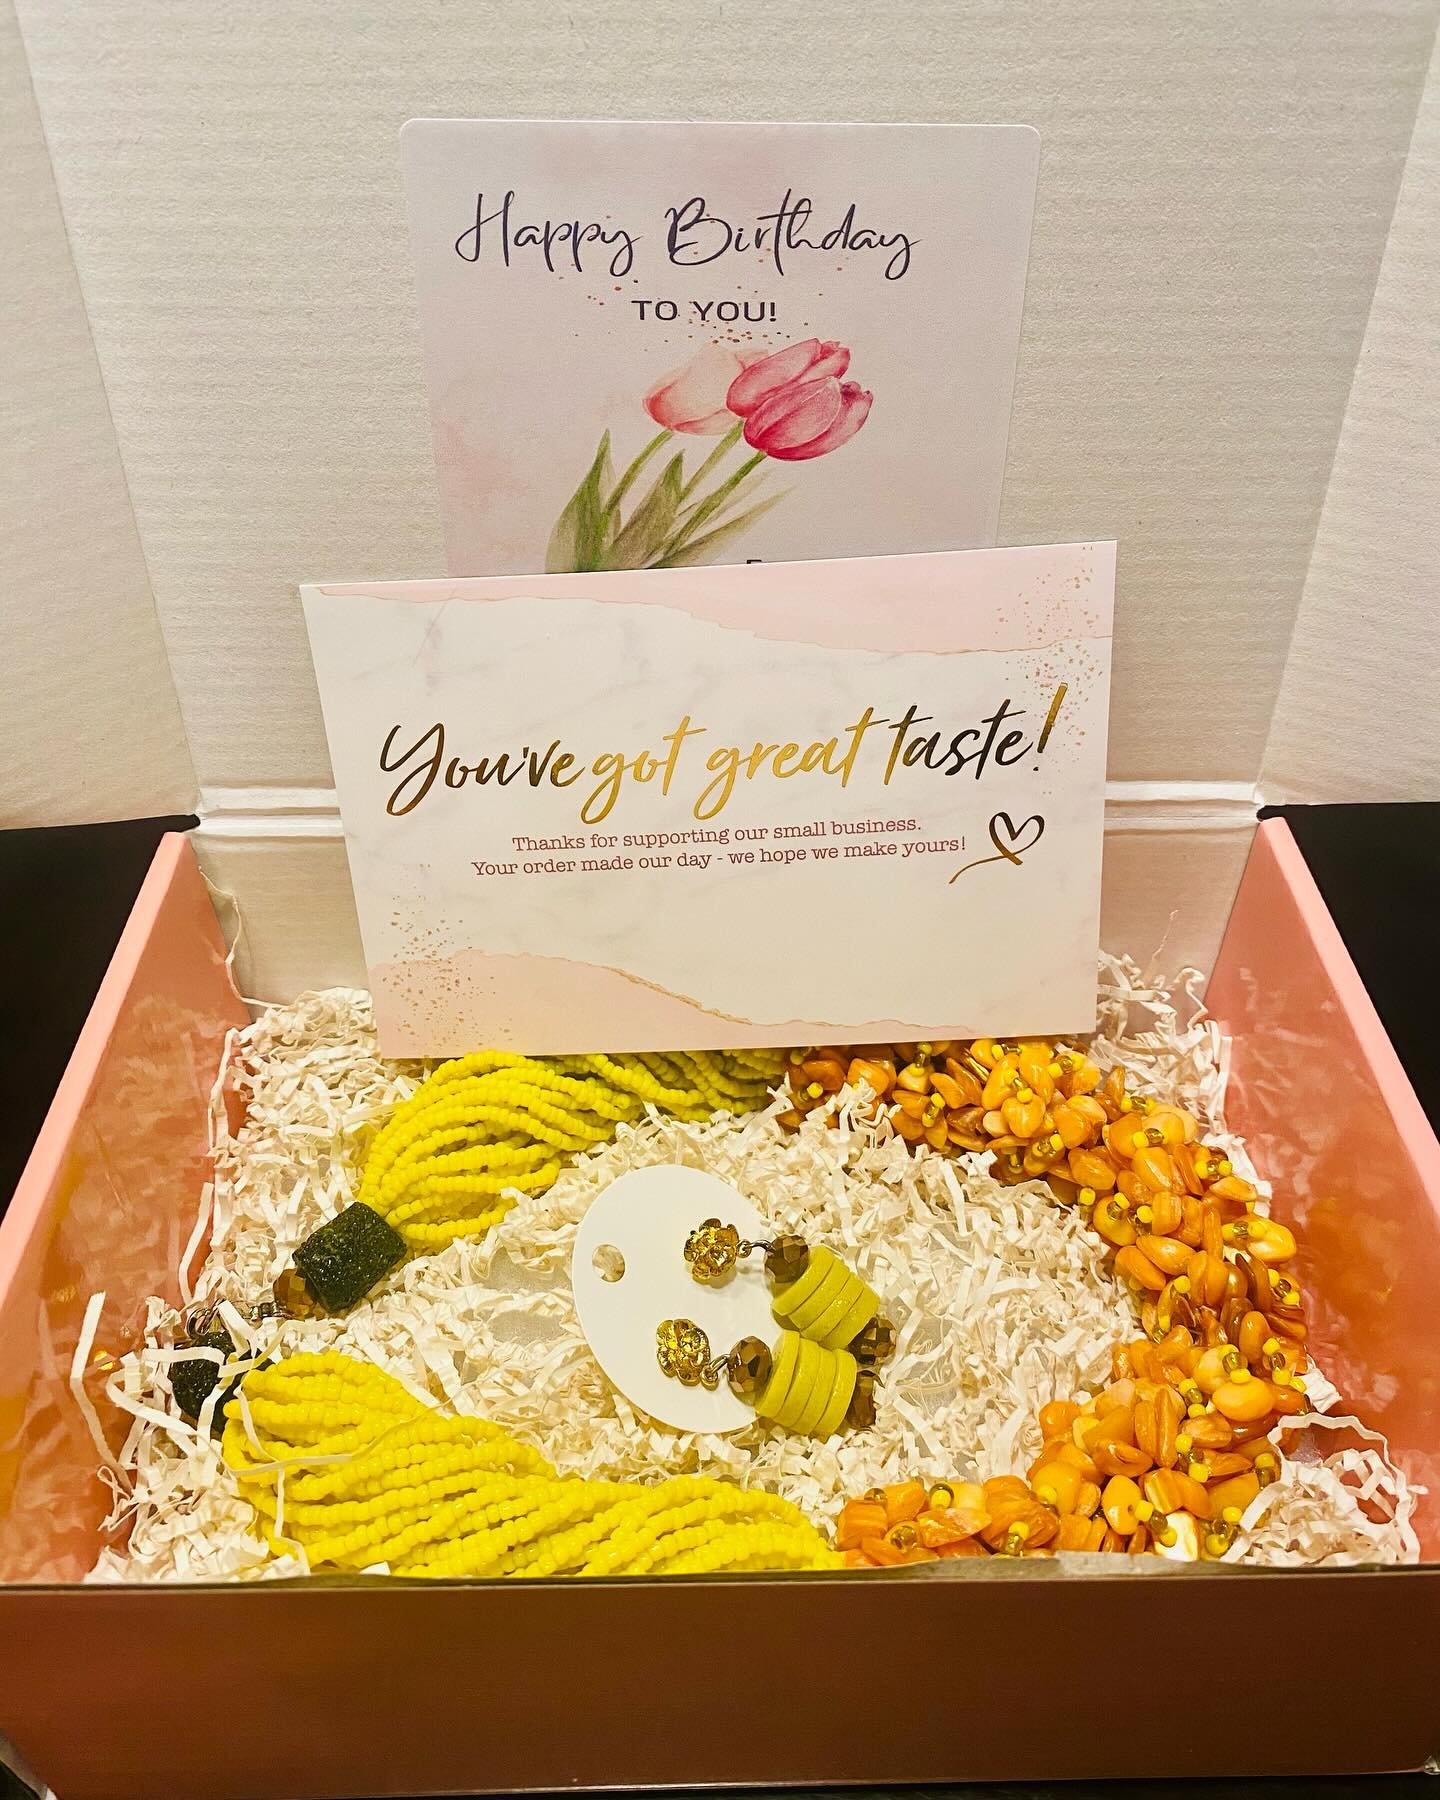 ✨ Excited to see our sunshine piece spreading joy on someone&rsquo;s special day! Our client requested a personalized birthday note, and we made it happen😍

Want to add a personal touch to your celebration? Reach out to us for your own custom creati